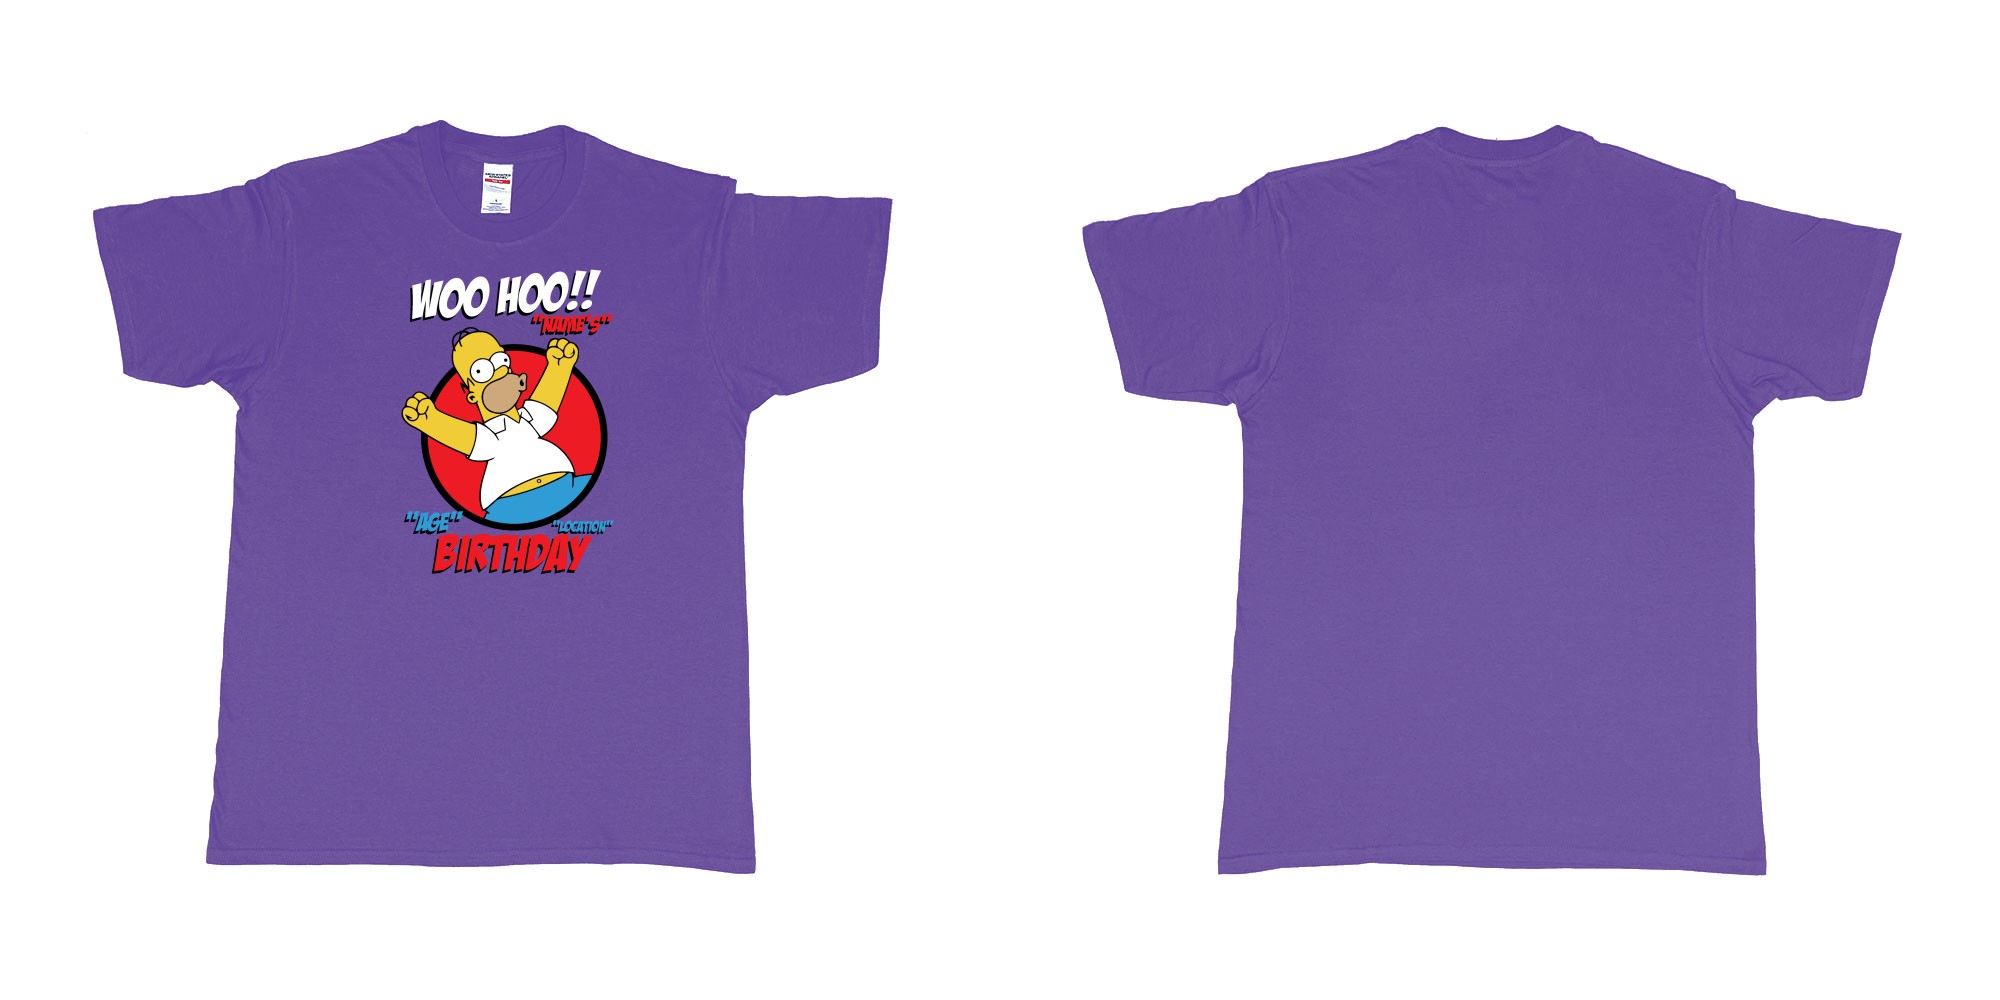 Custom tshirt design homer simpson woo hoo custom age name birthday in fabric color purple choice your own text made in Bali by The Pirate Way